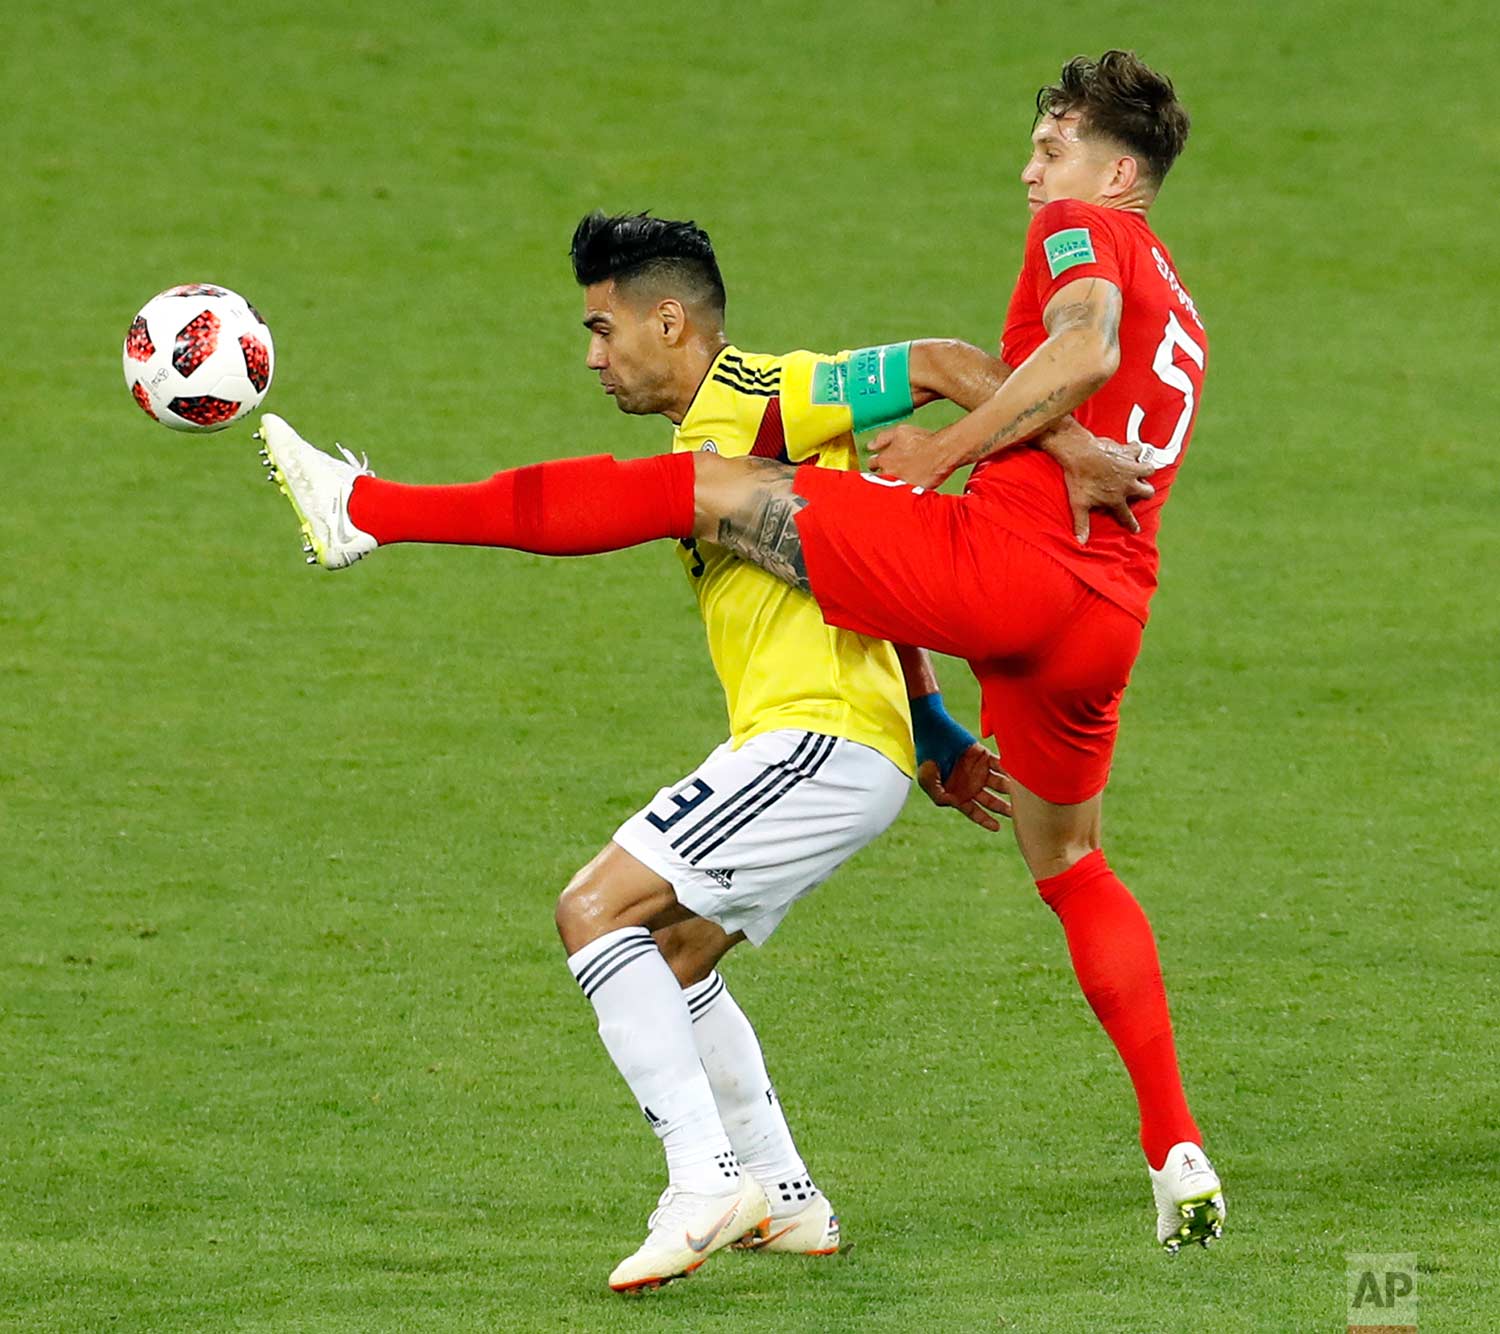  Colombia's Radamel Falcao fights for the ball with England's John Stones, right, during the round of 16 match between Colombia and England at the 2018 soccer World Cup in the Spartak Stadium, in Moscow, Russia, Tuesday, July 3, 2018. (AP Photo/Anton